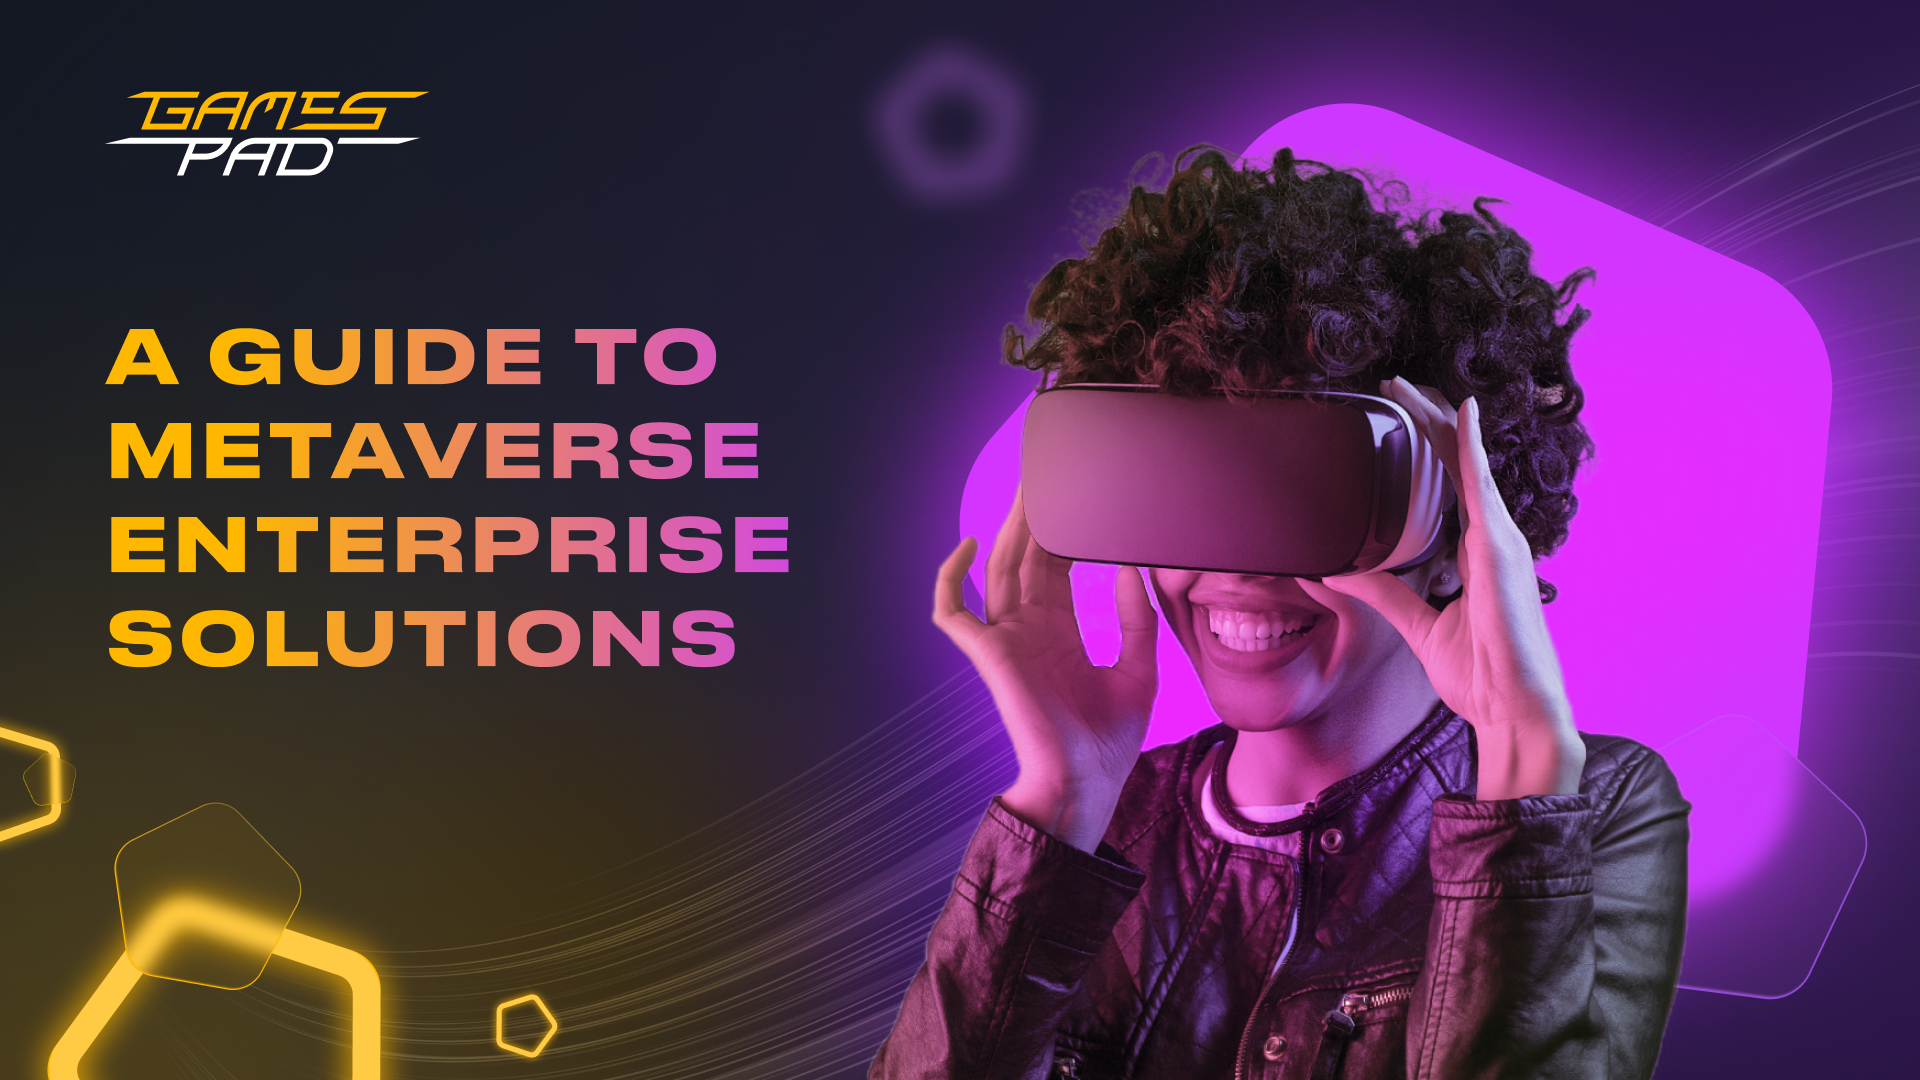 GamesPad: A Guide to Metaverse Enterprise Solutions 1